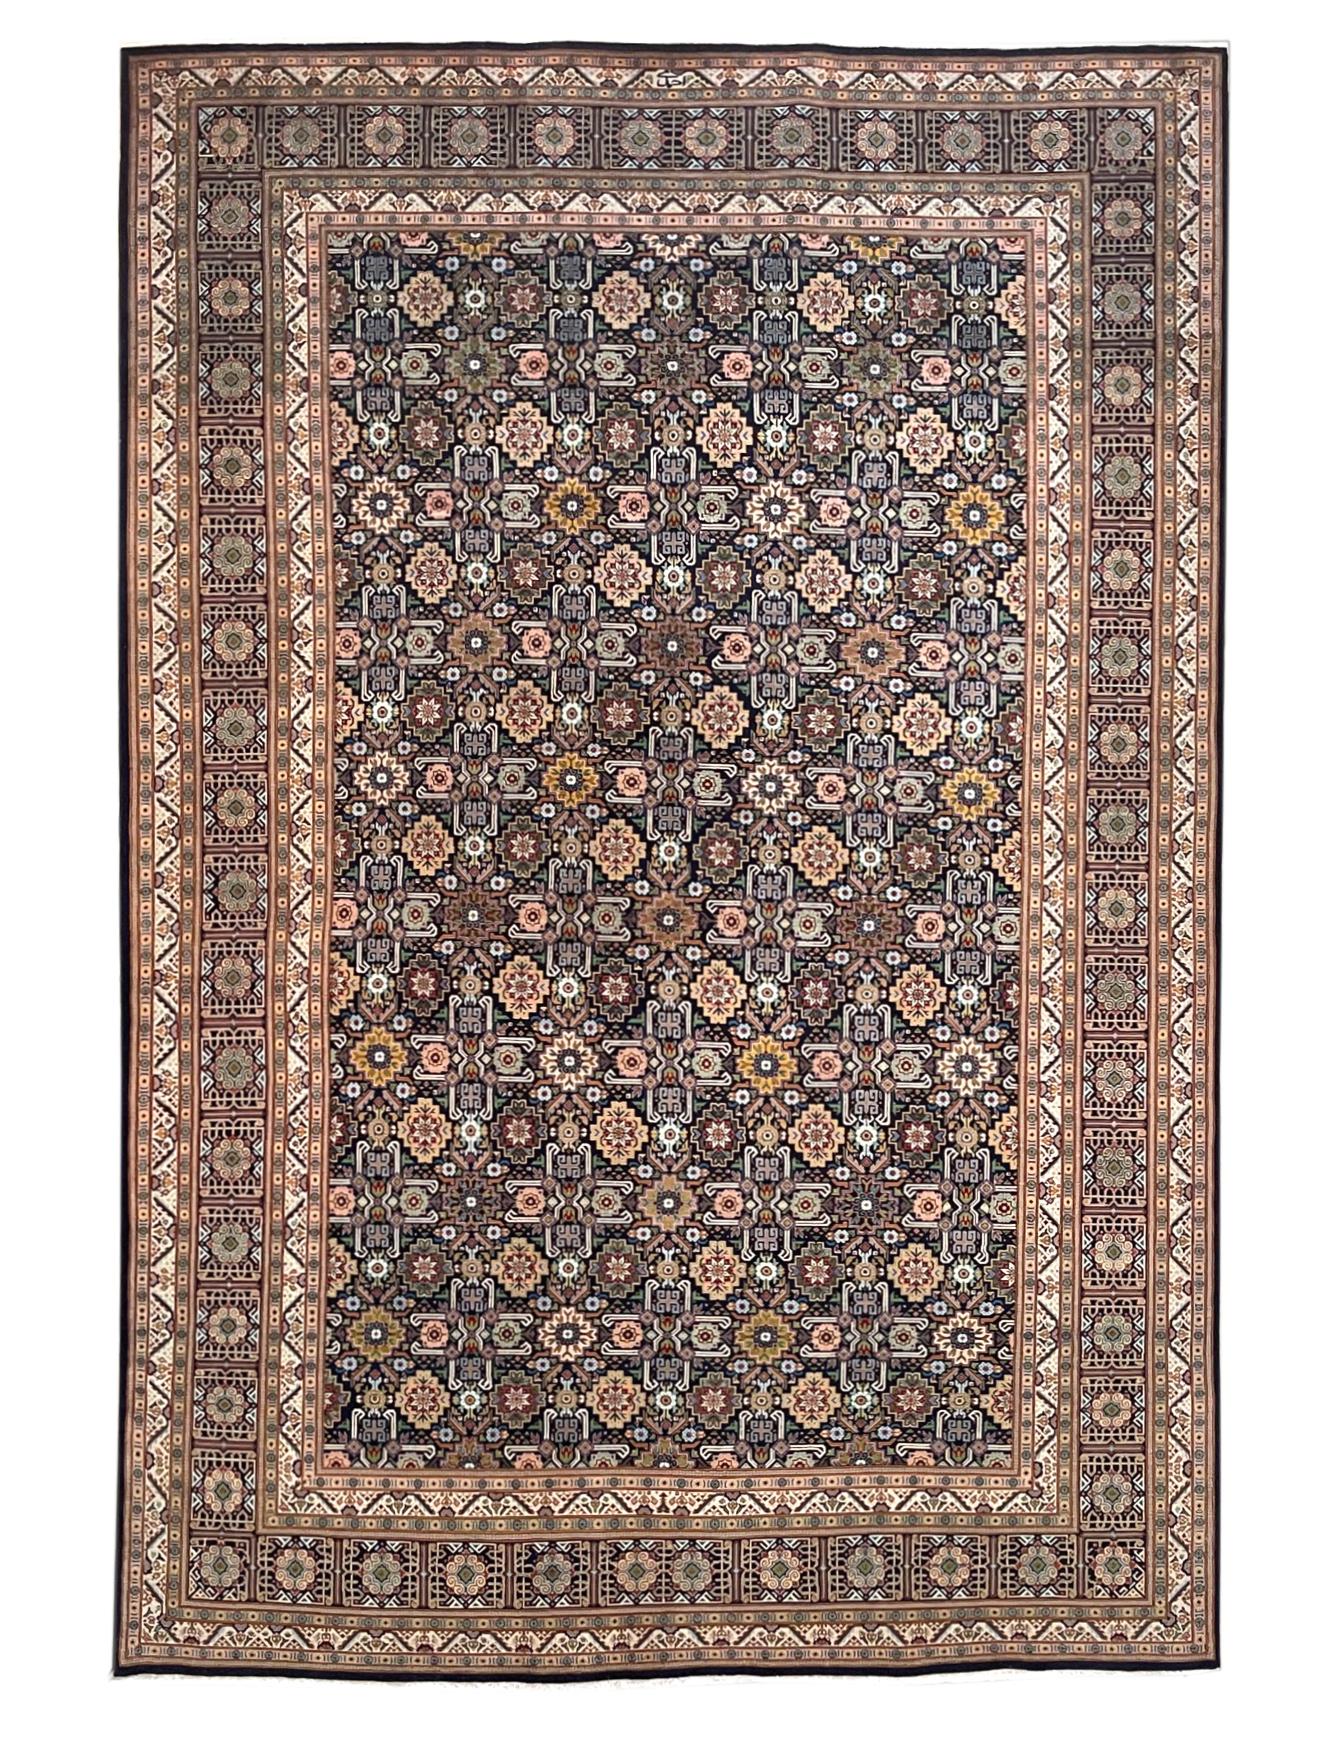 This rug is a hand-knotted Persian Tabriz rug with a great quality. Tabriz is one of the oldest rug weaving centers and makes a huge diversity of types of rugs. This rug features has an allover design known as Ghoba with a very unique and lovely